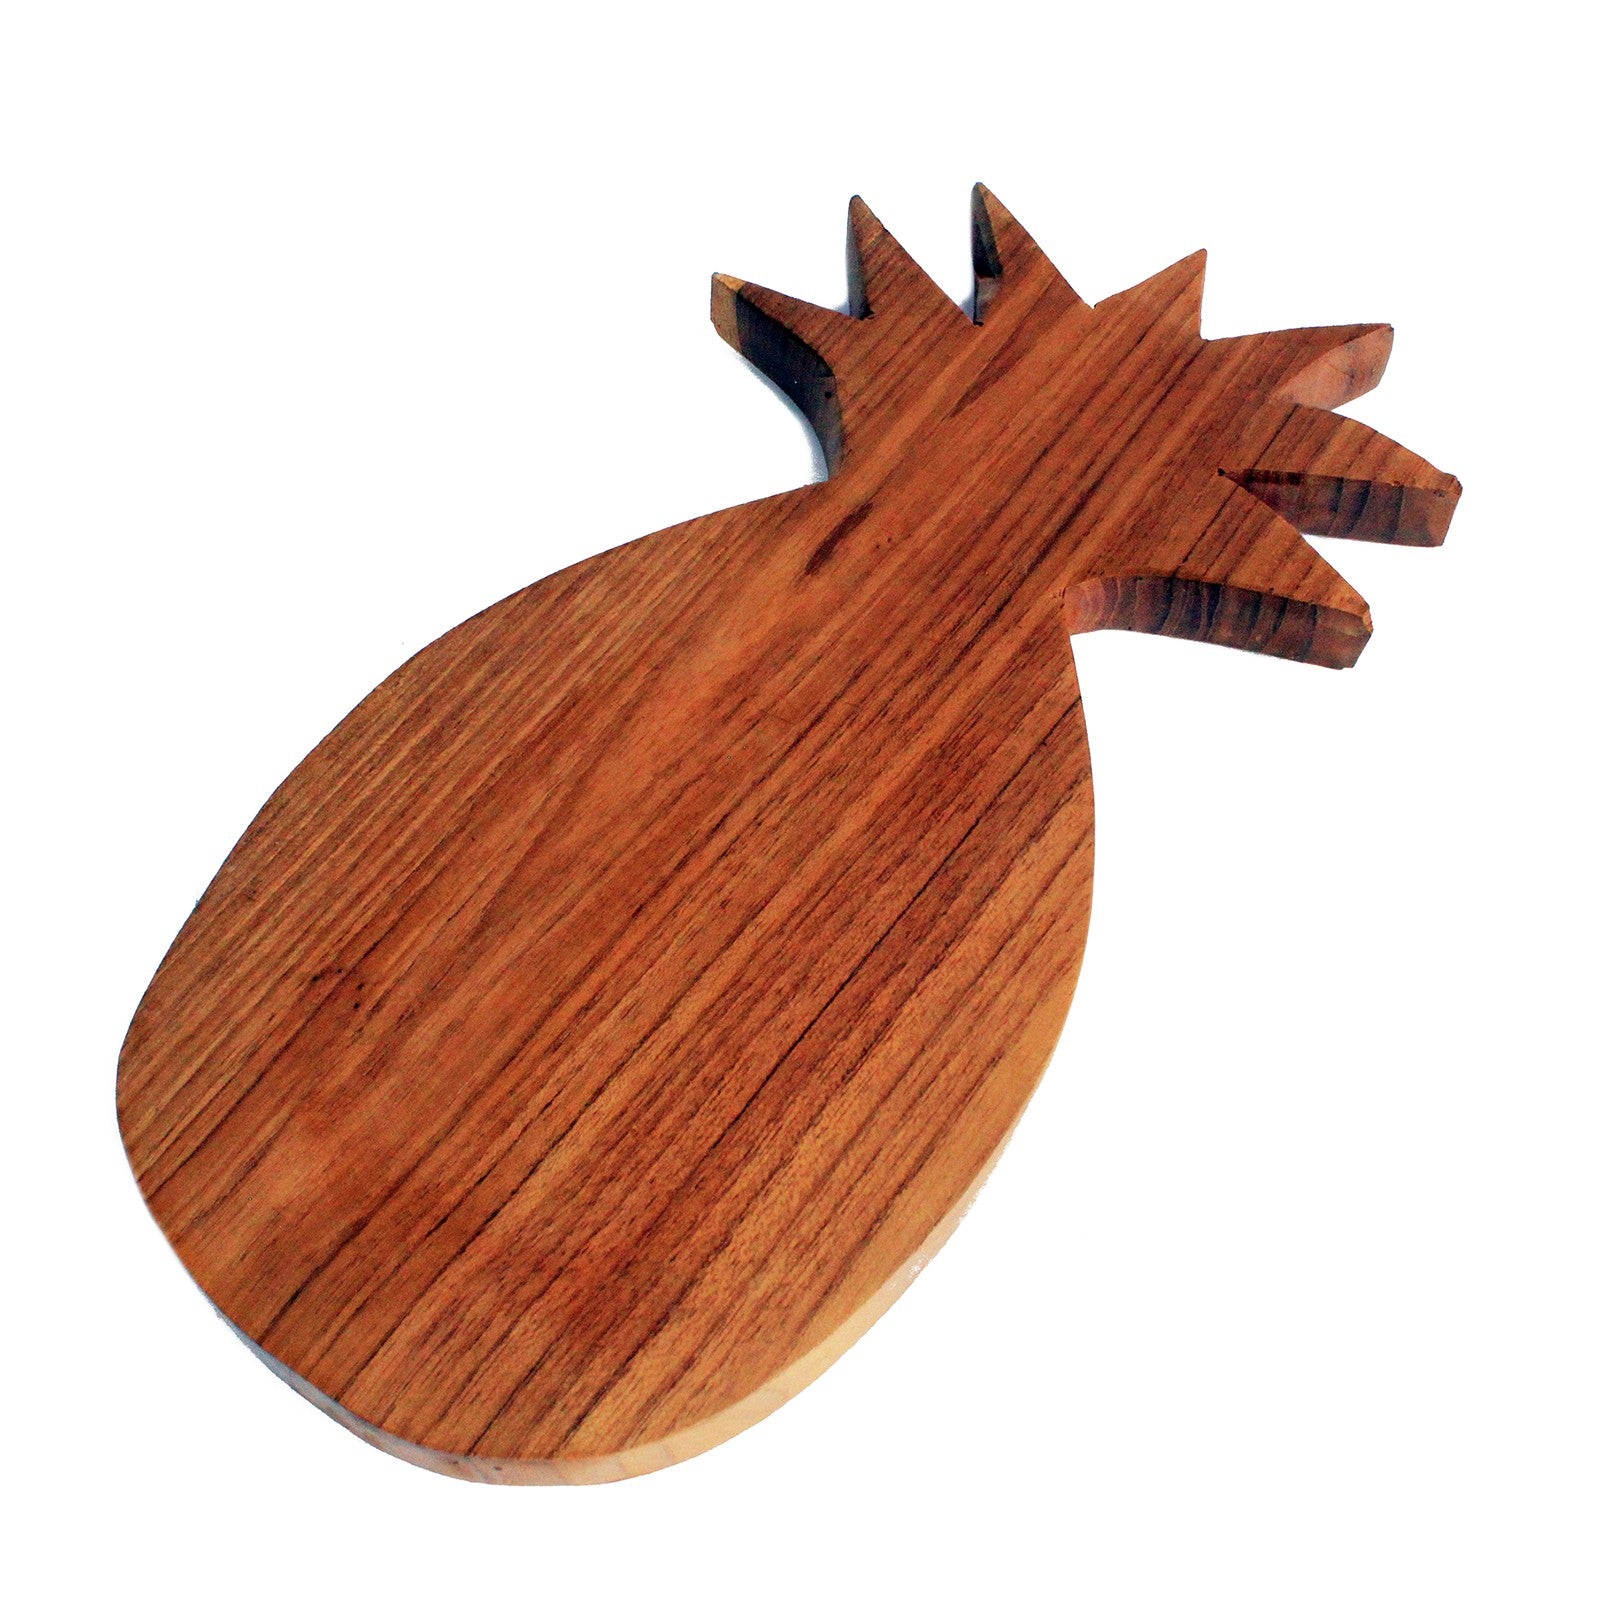 View Pineapple Shaped Chopping Board information